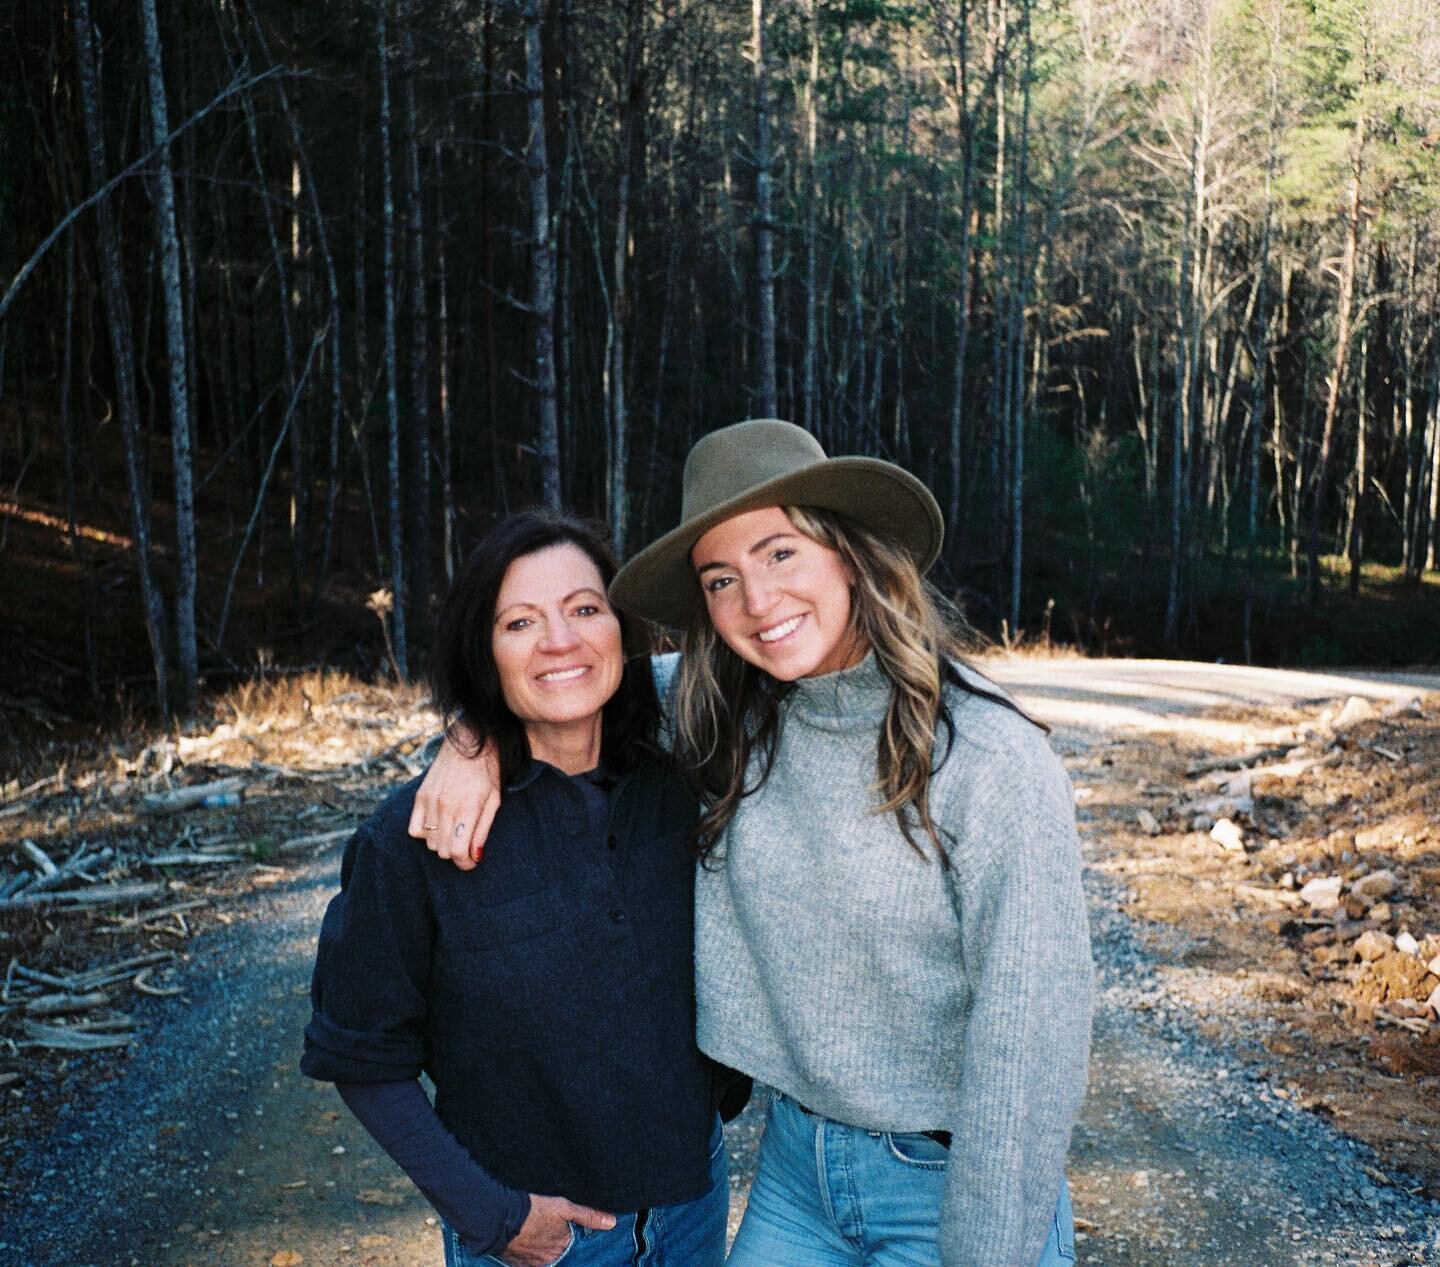 A happy late Mother&rsquo;s Day post for my mamma! I am so grateful and blessed to have you in my life as someone to look up to and aspire to be. You relentlessly show up for everyone no matter how inconvenient and exude so much warmth, love, and int